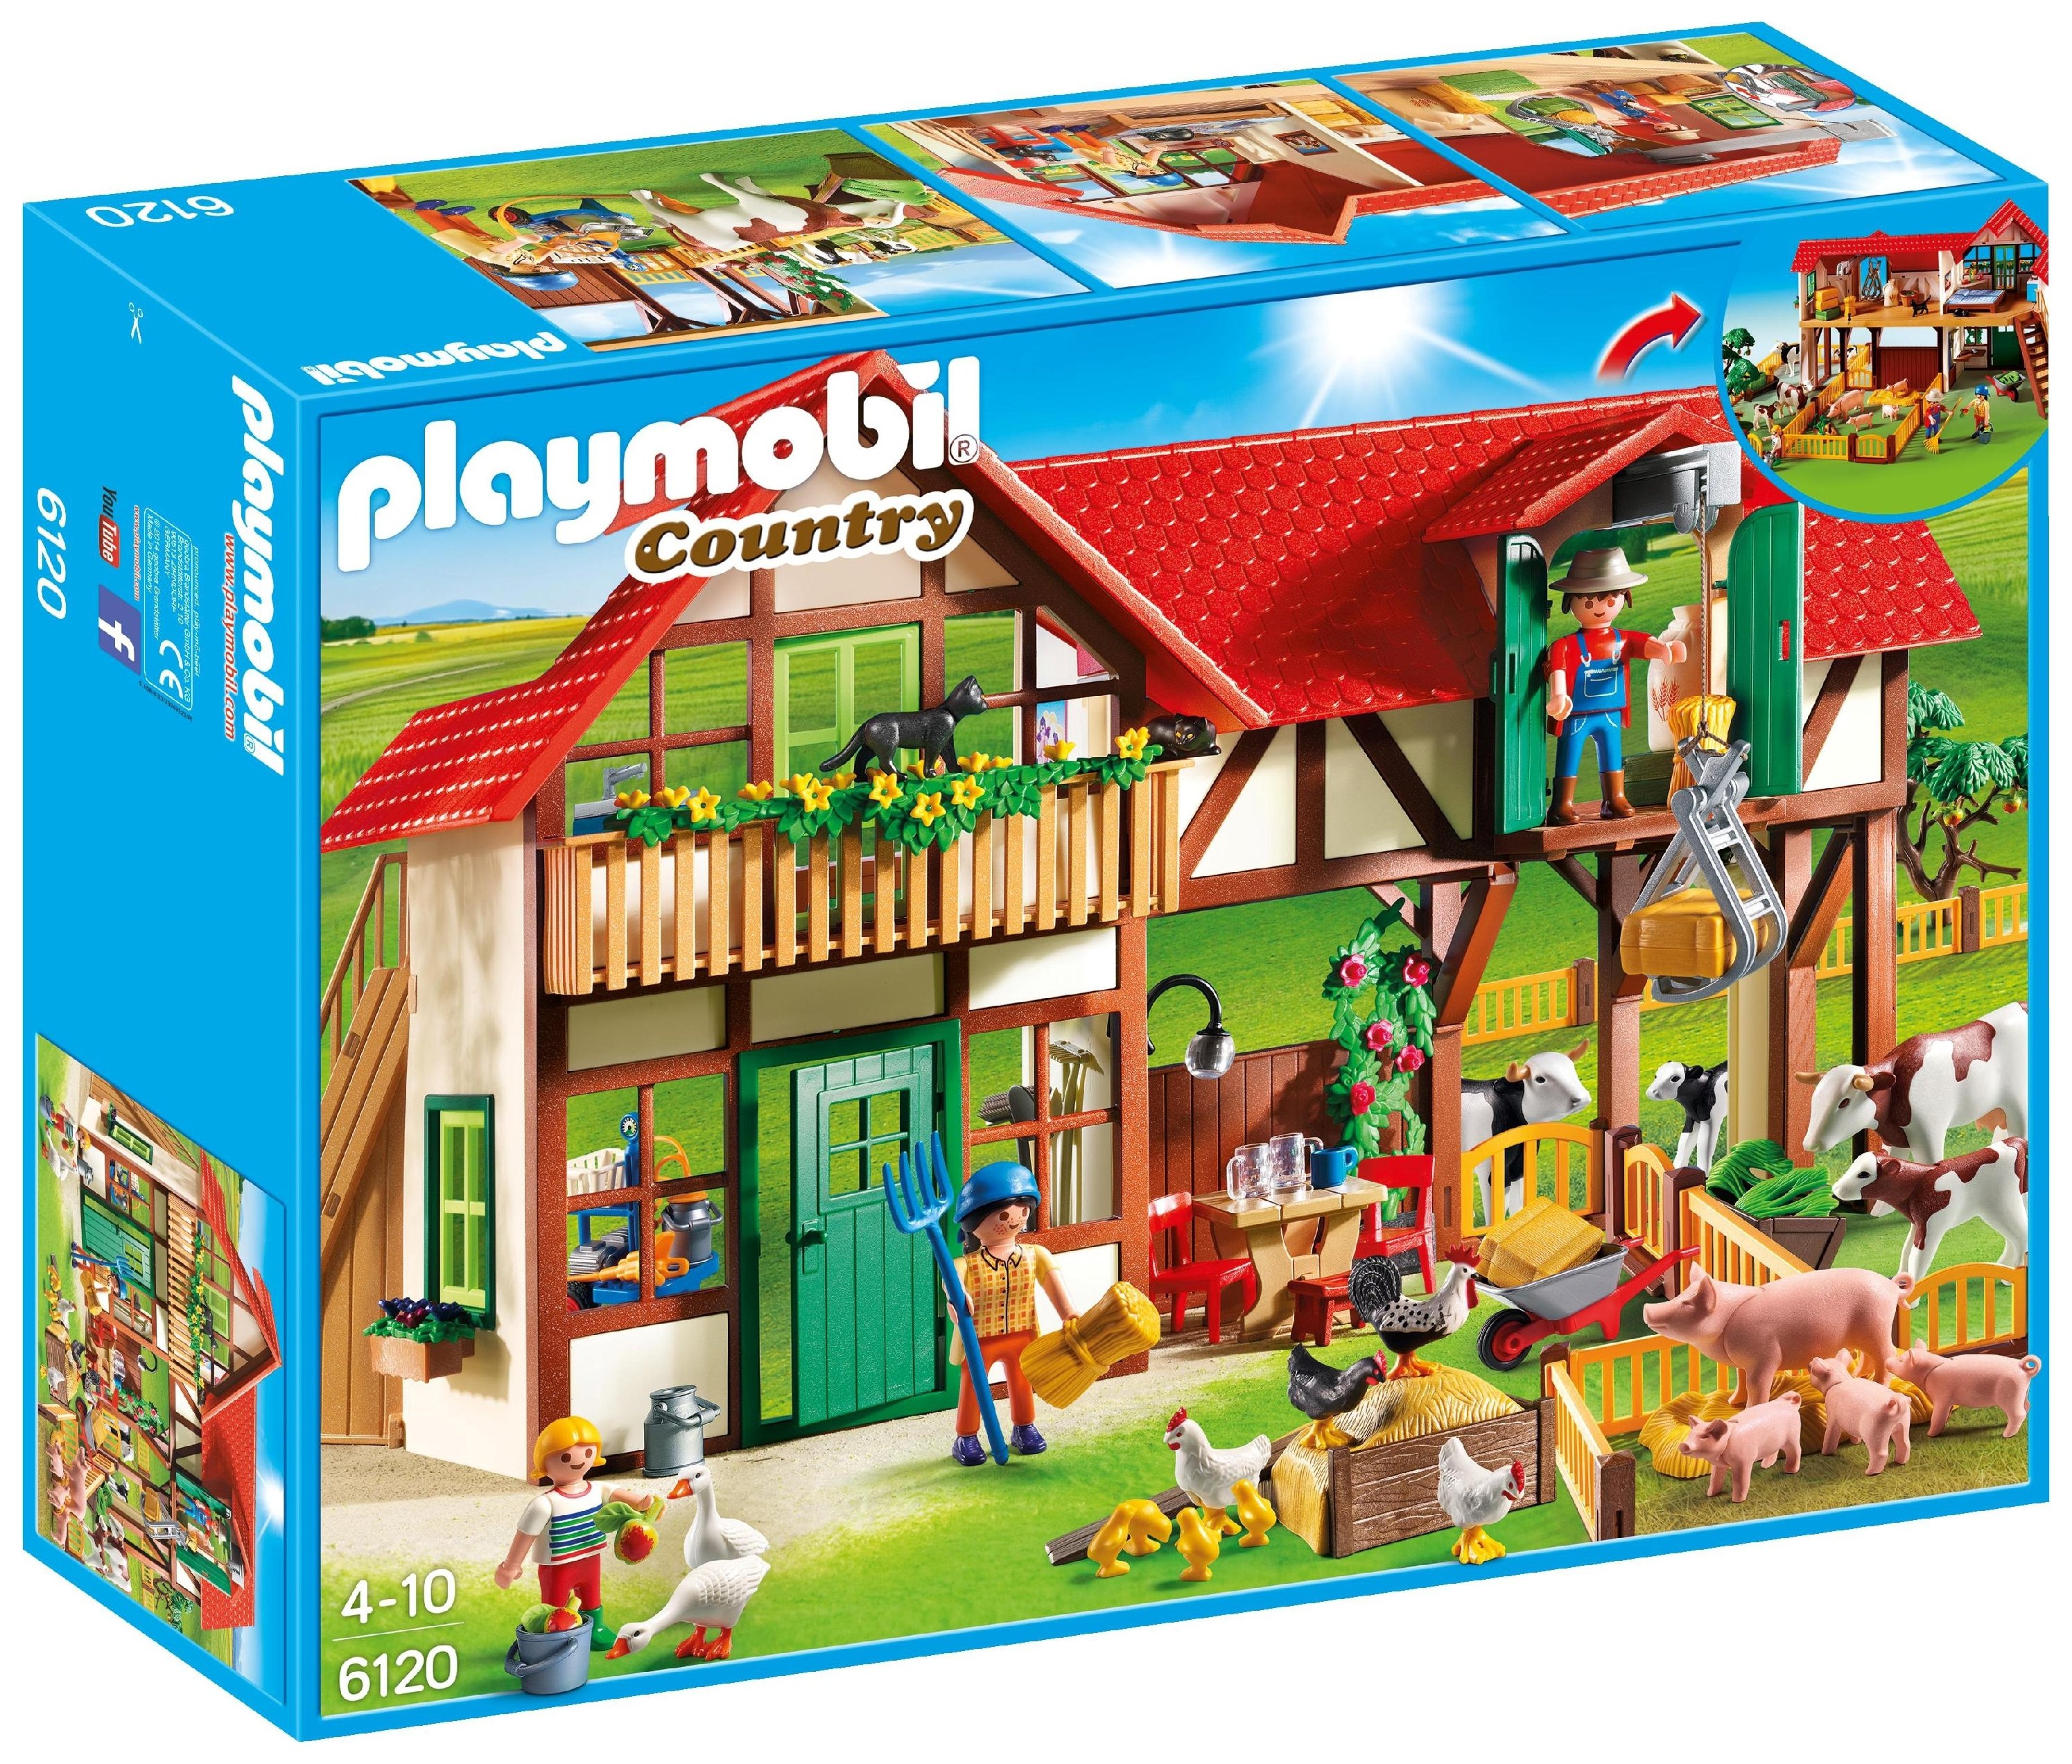 Playmobil 6120 Country Large Farm.